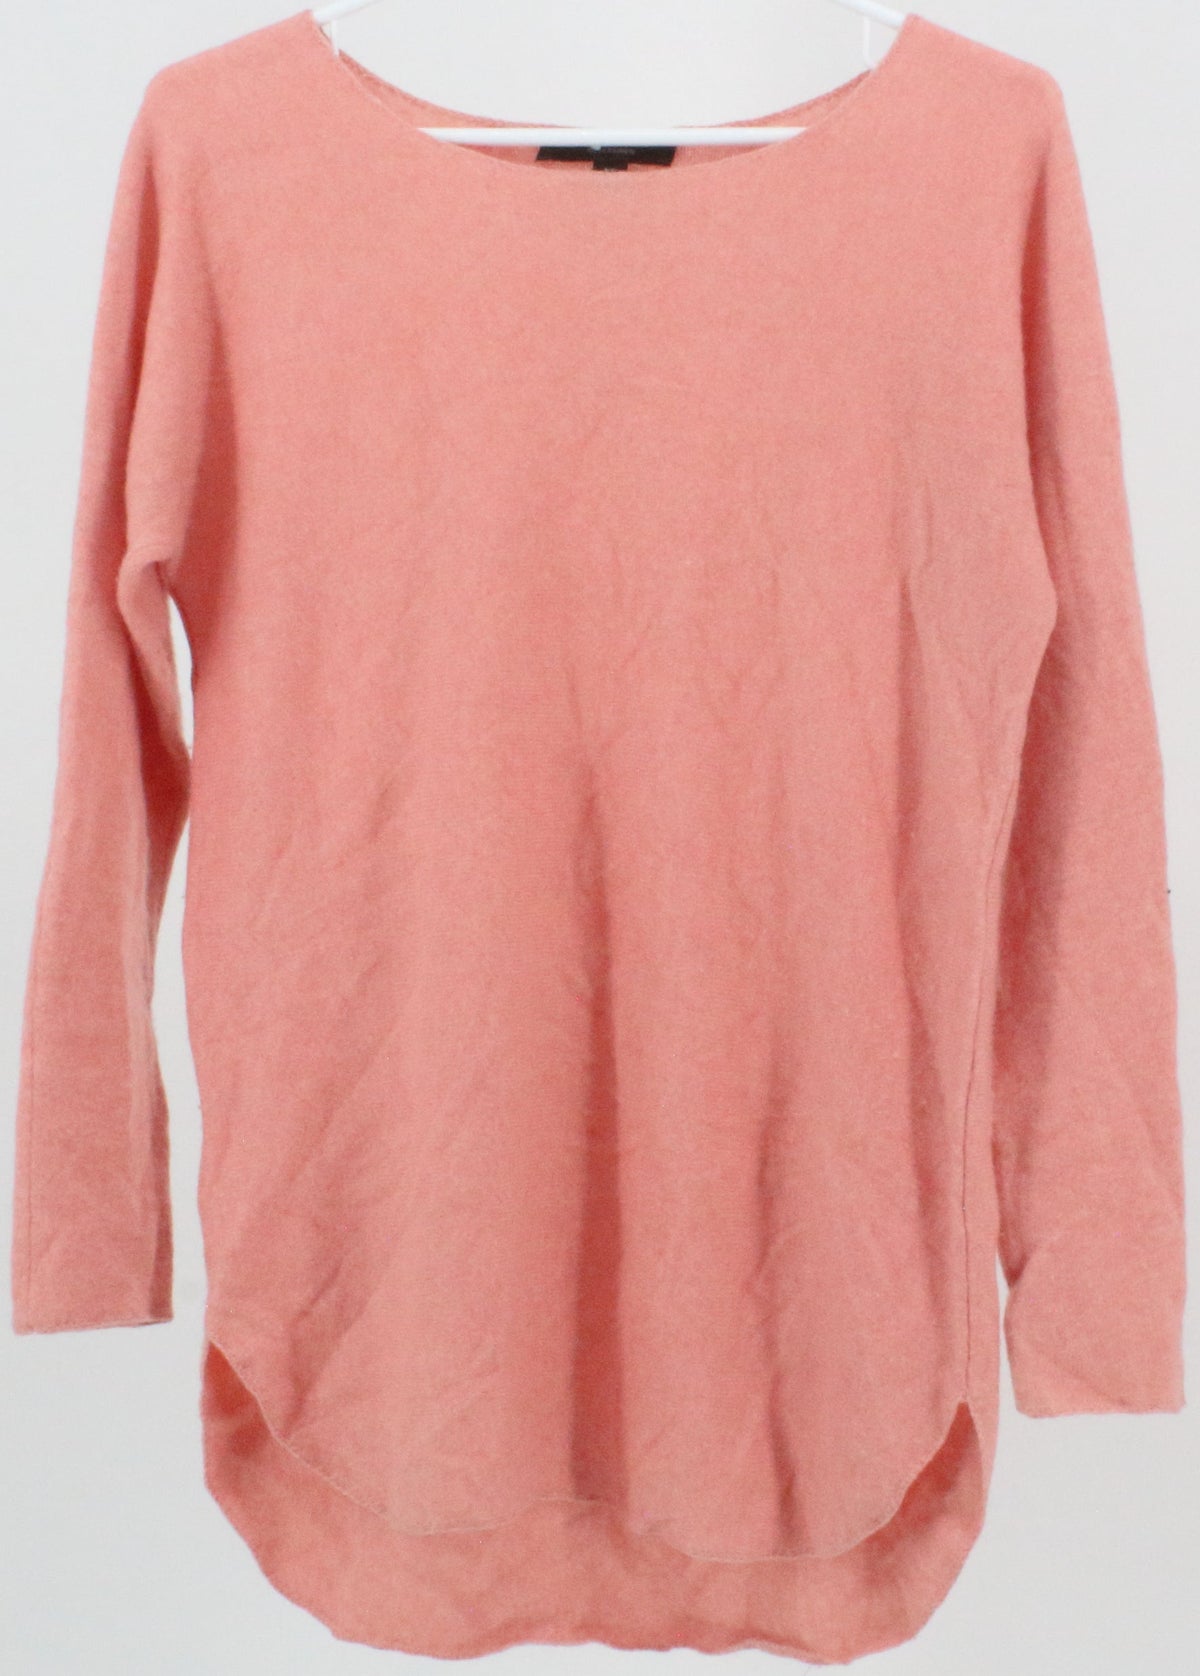 Ann Taylor Pink Cashmere Sweater